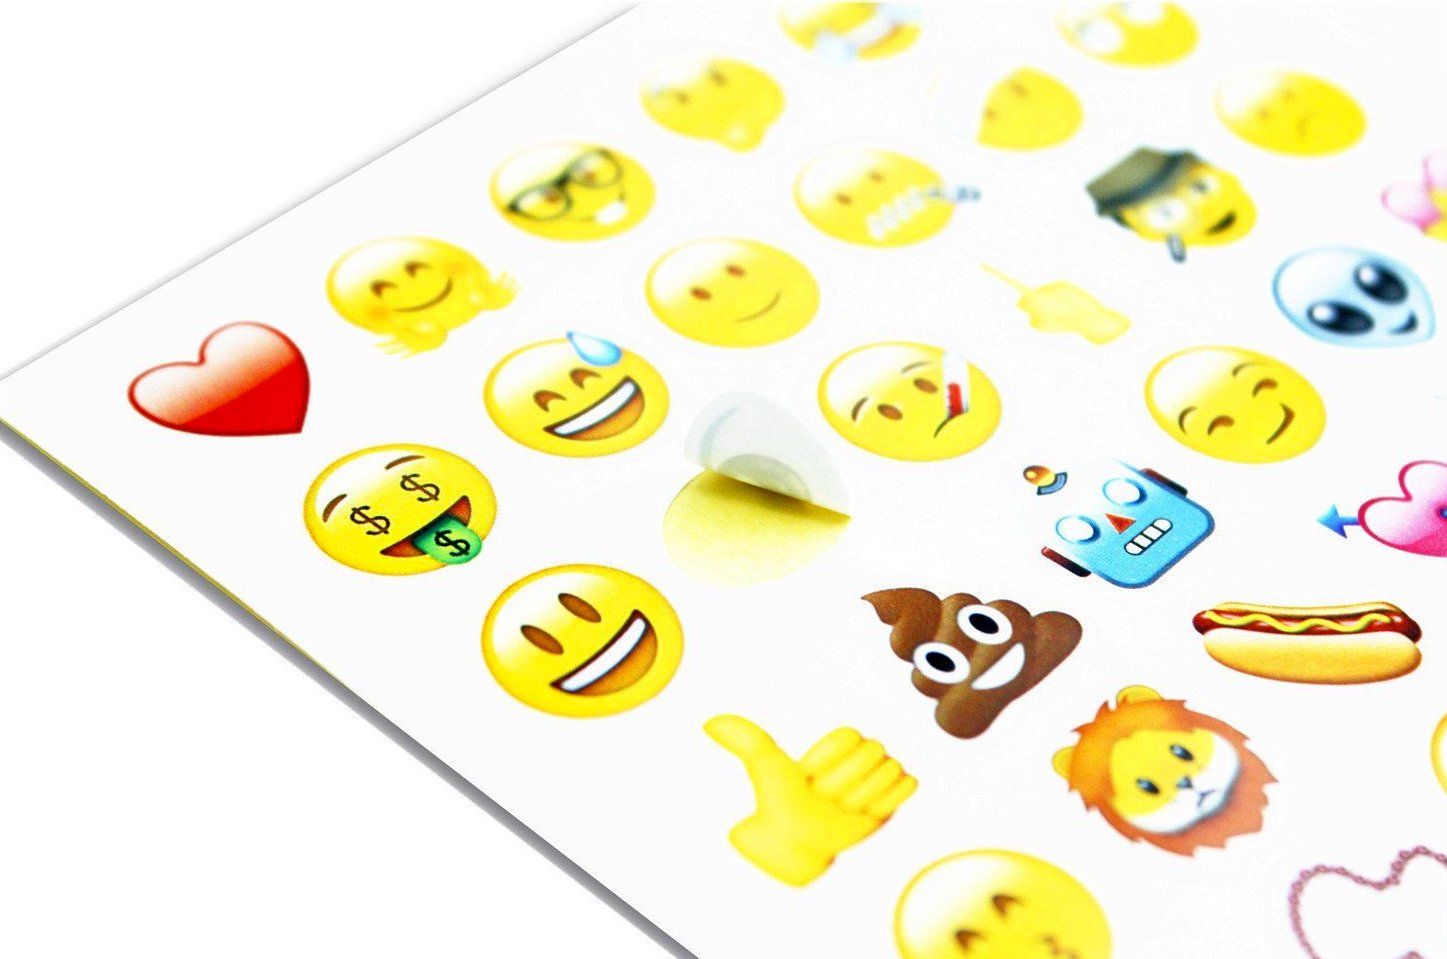 Manage Your Smart Lightbulbs With Emoji Stickers